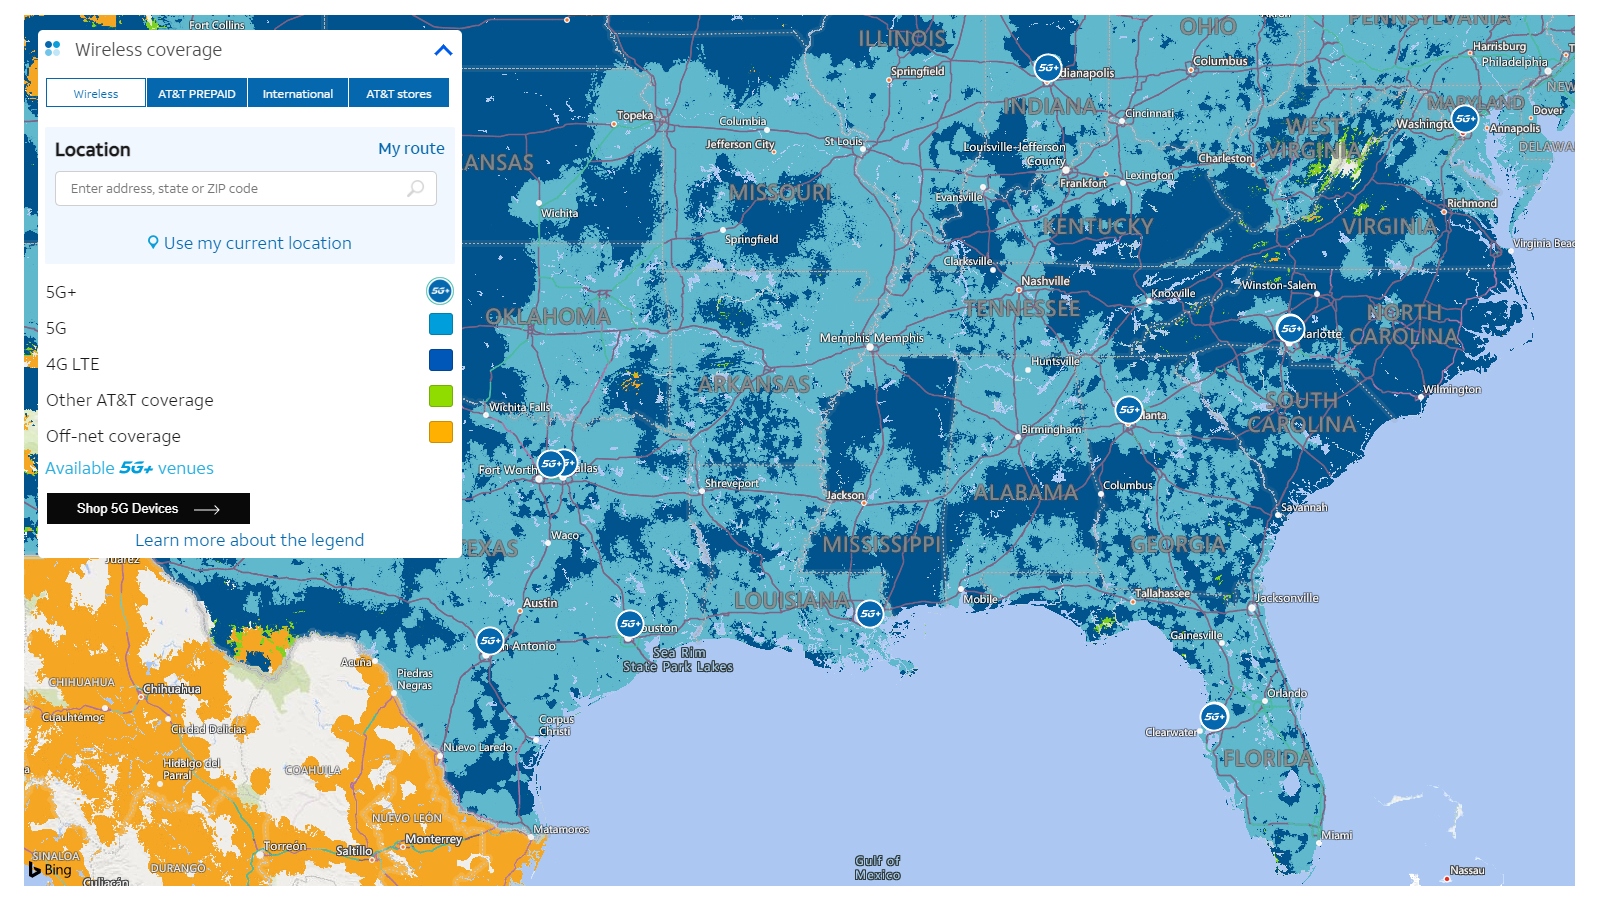 Cell phone coverage maps: who has the best network in America? | Top